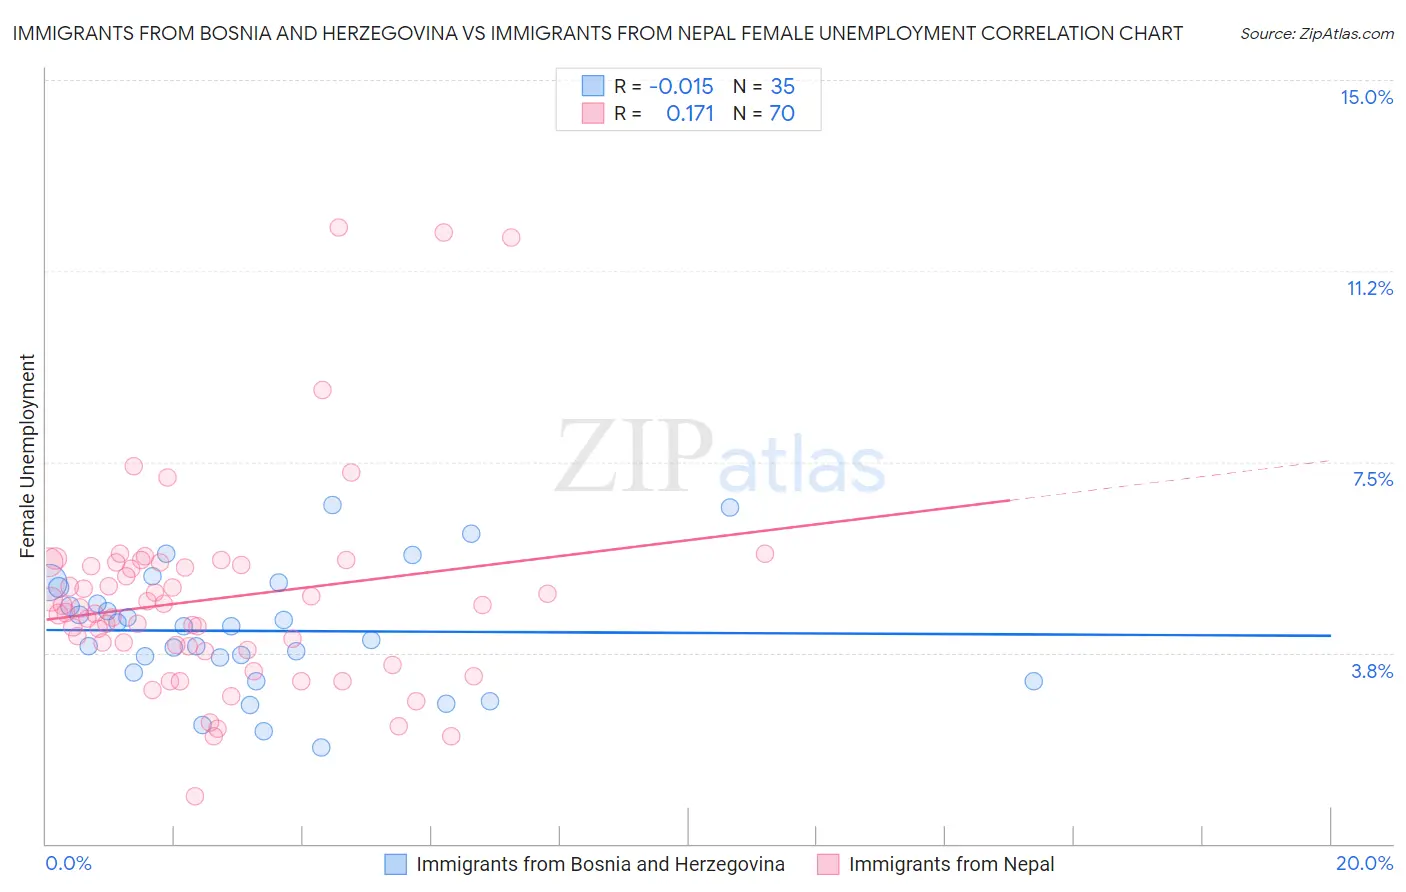 Immigrants from Bosnia and Herzegovina vs Immigrants from Nepal Female Unemployment